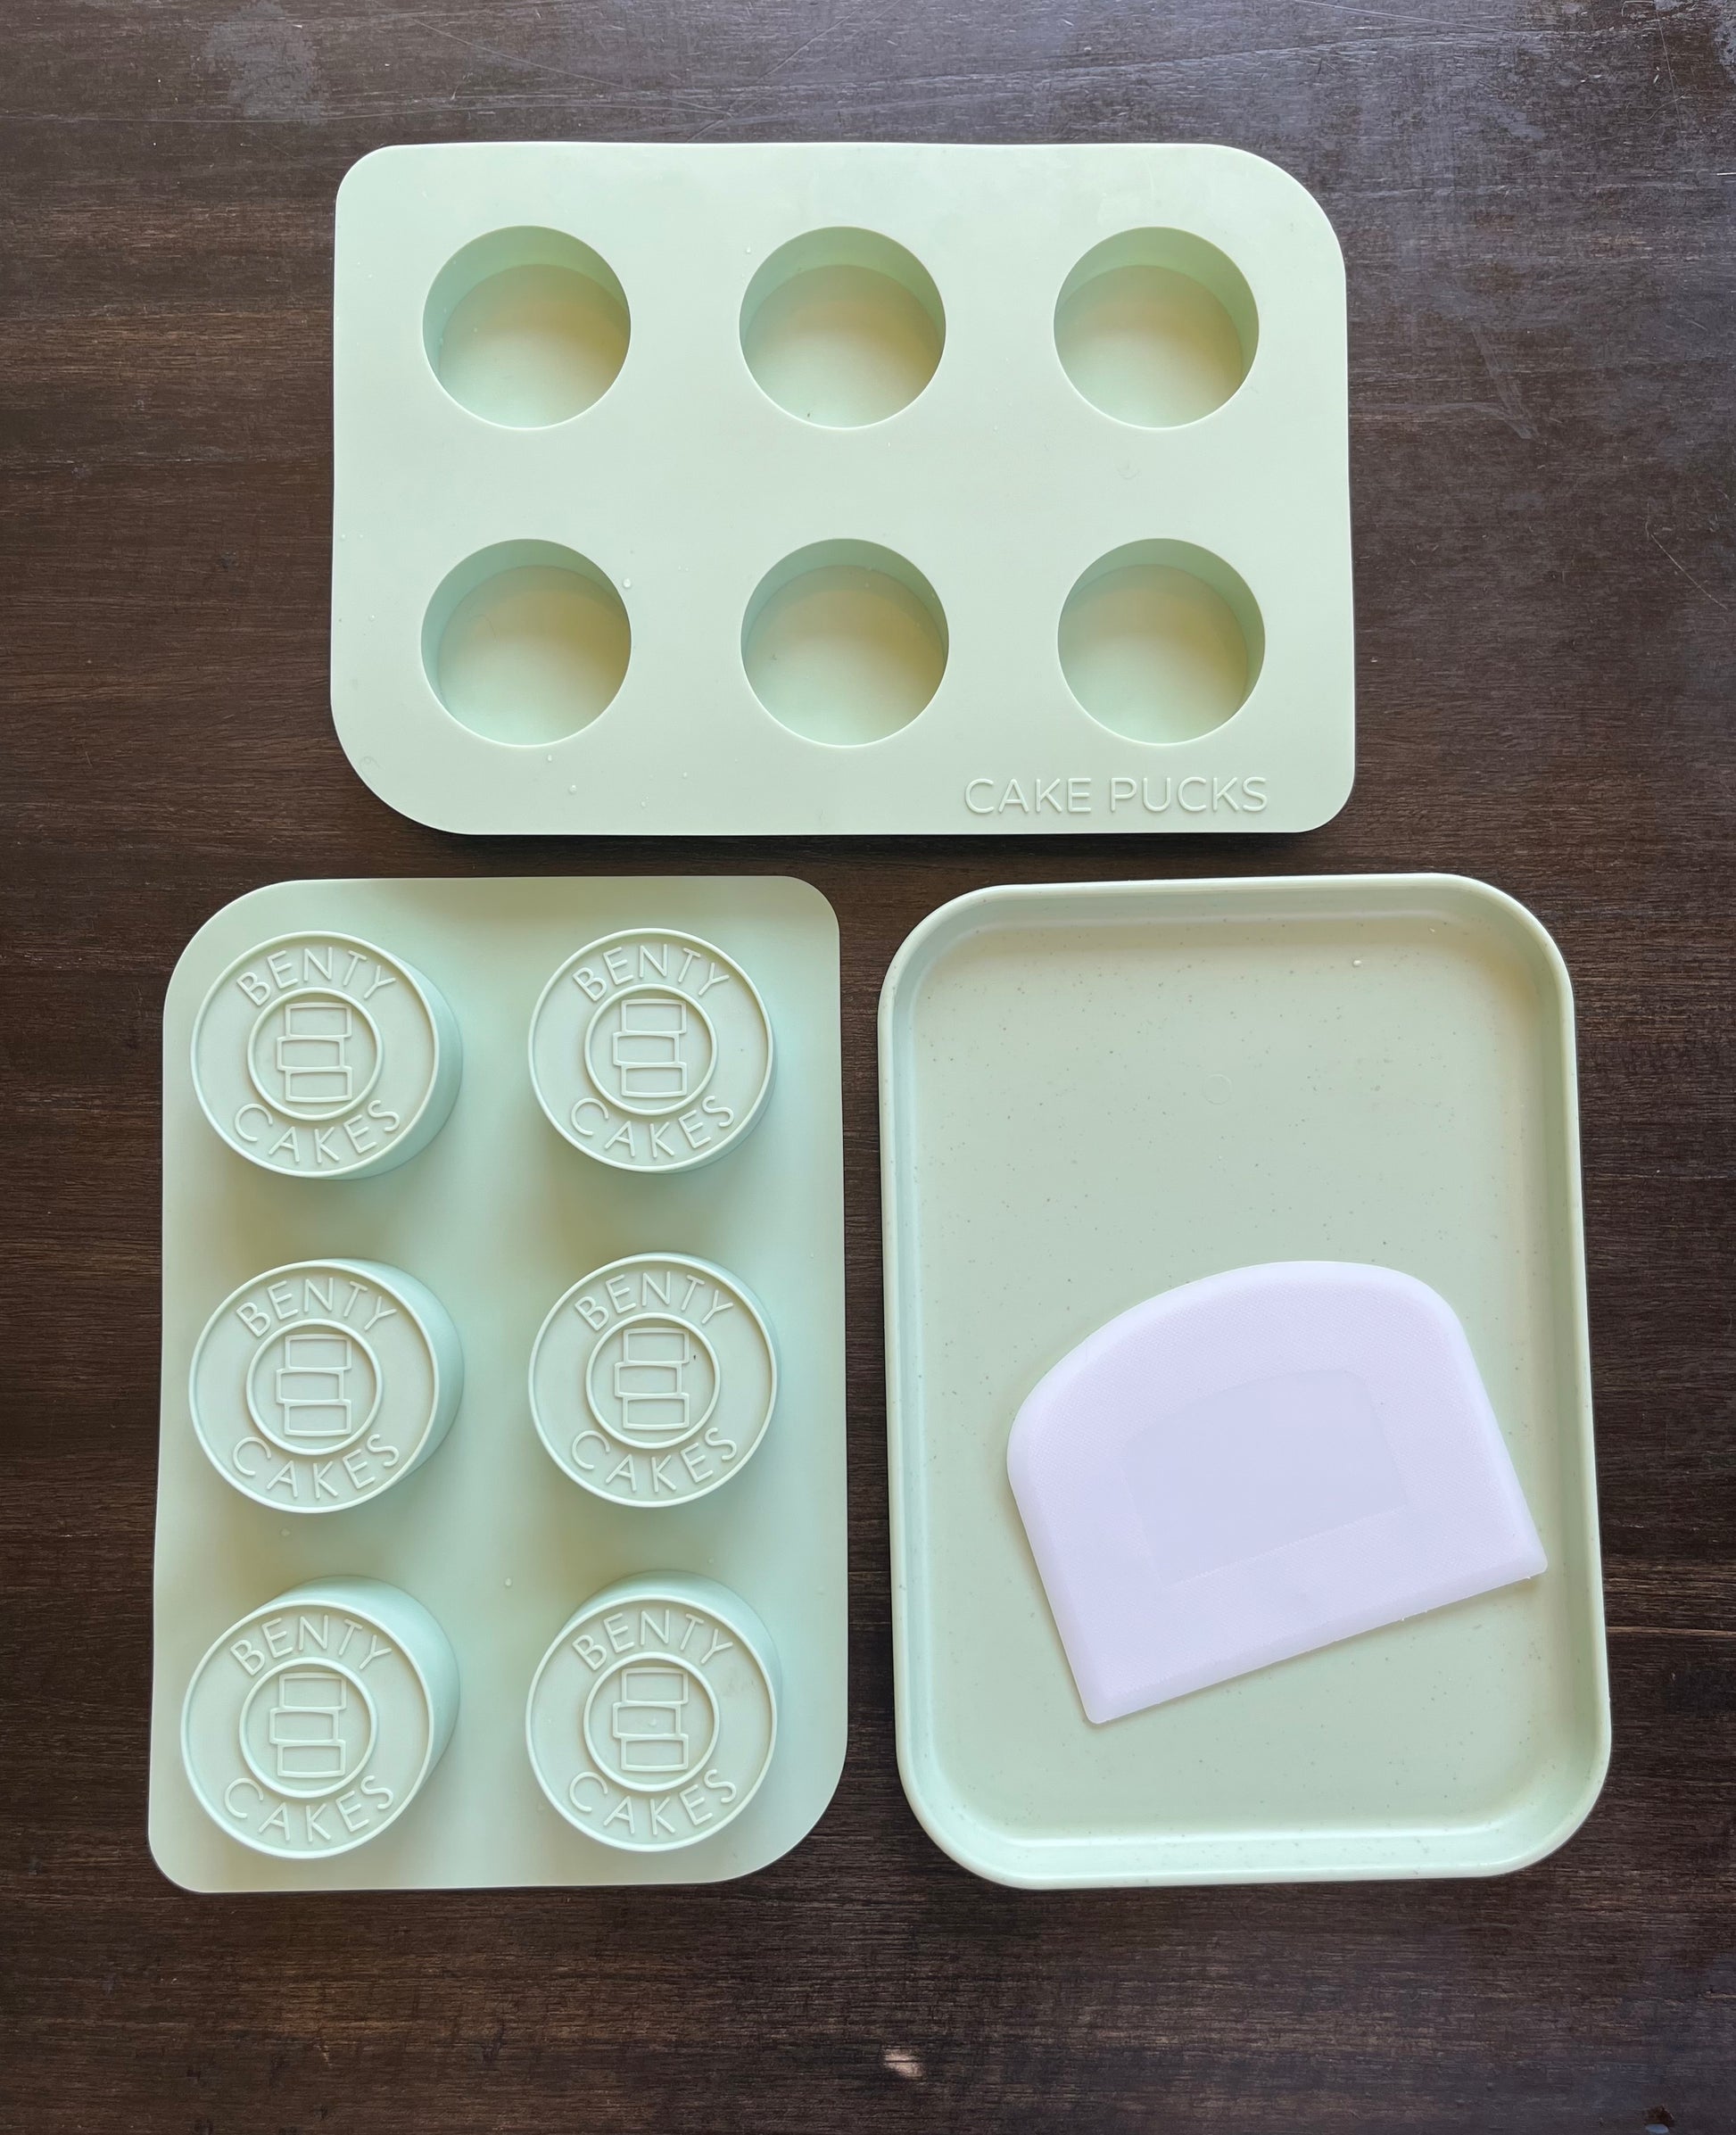  Benty Cakes The Original Cake Puck Mold Set – It's not a Pop,  it's a Puck! The Easier Way to Make Chocolate Covered Desserts – BPA Free  Silicone-Includes 2 Molds,1 Plastic